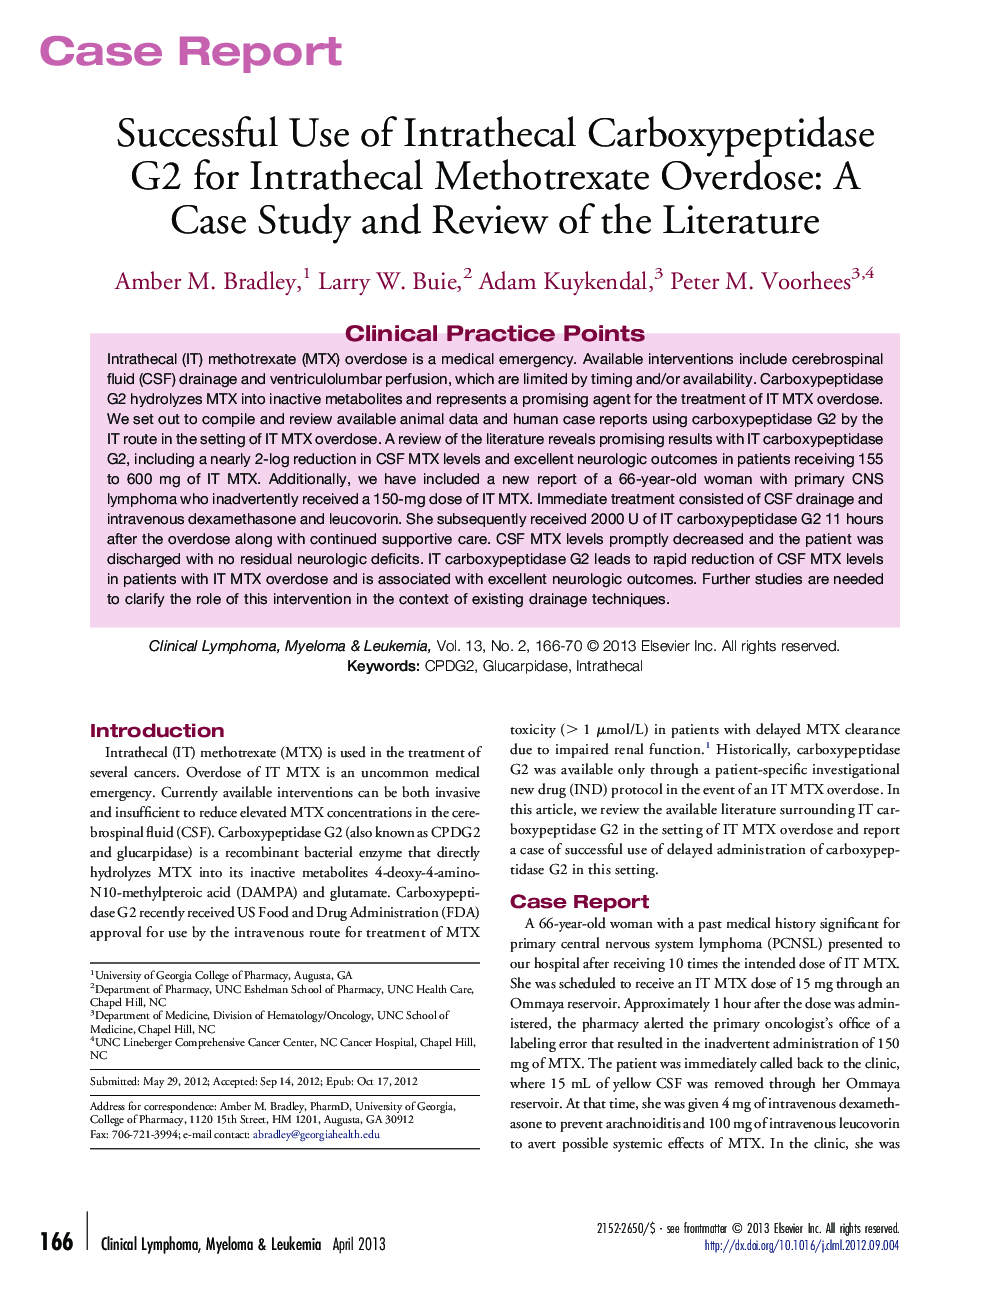 Successful Use of Intrathecal Carboxypeptidase G2 for Intrathecal Methotrexate Overdose: A Case Study and Review of the Literature